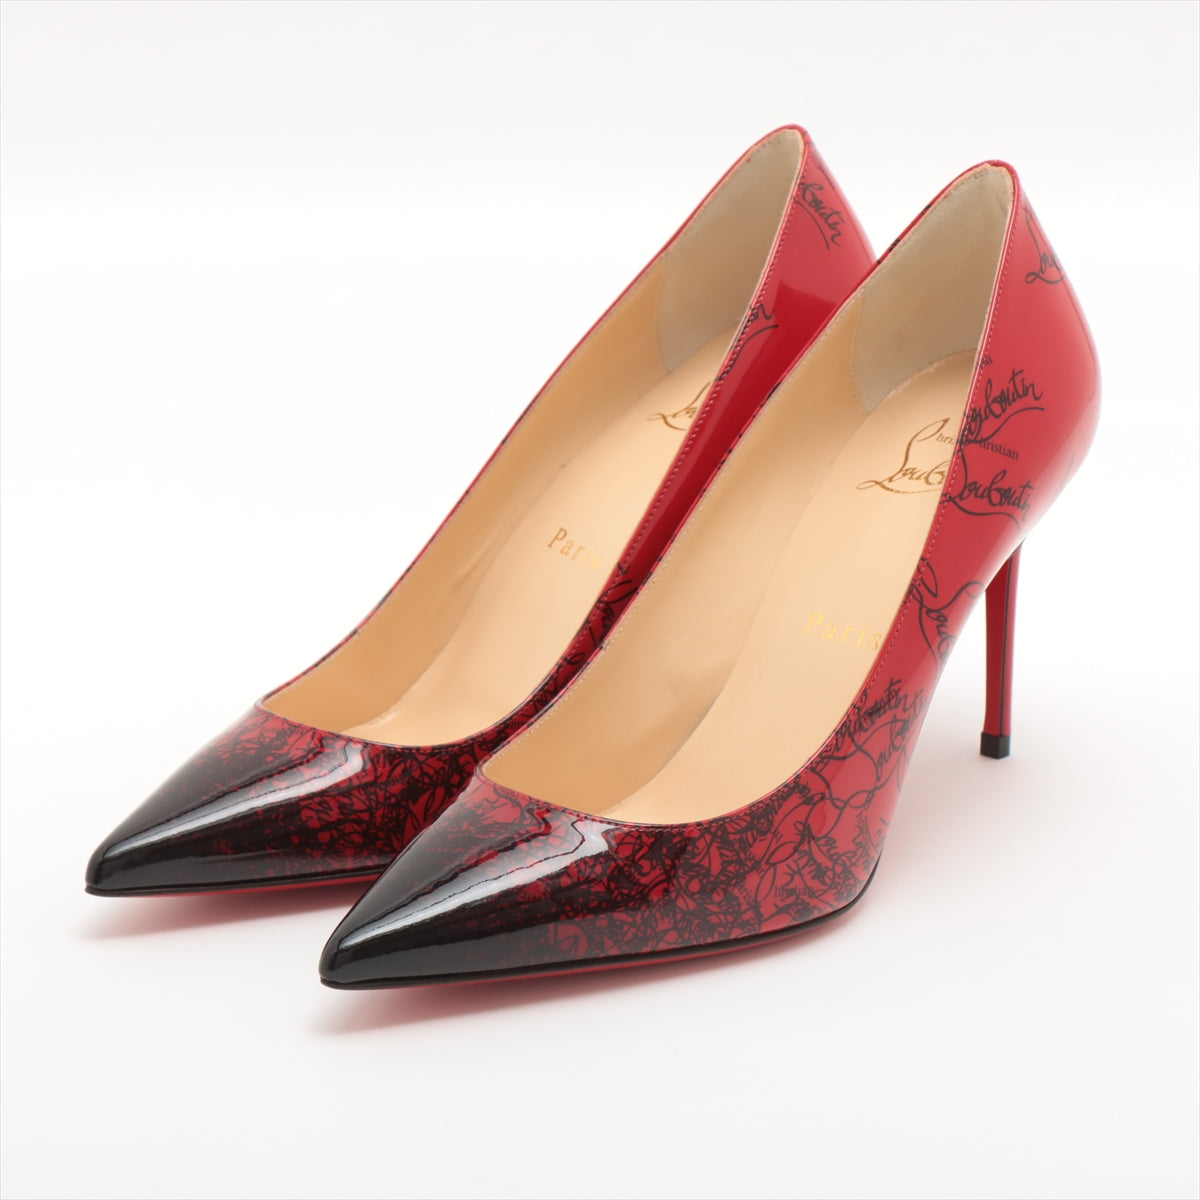 Christian Louboutin Patent leather Pumps 36 1/2 Ladies' Red x Black DECOLLETE 554 DEGRALOUBI box sack There is a replacement lift